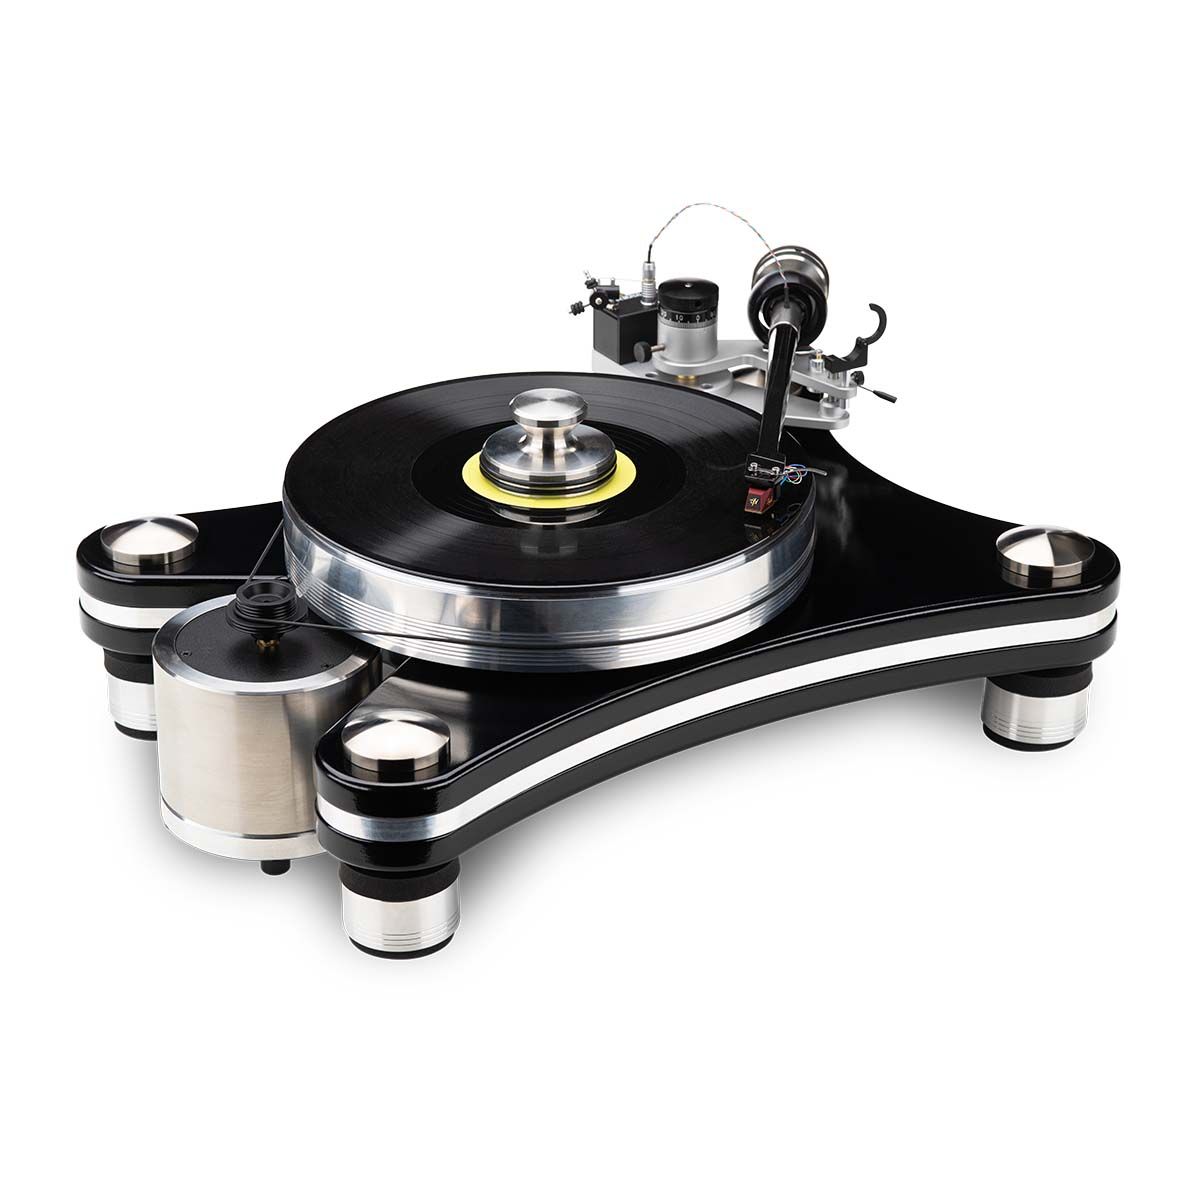 VPI Prime Signature 21 Turntable, Black, front angle with record and record weight